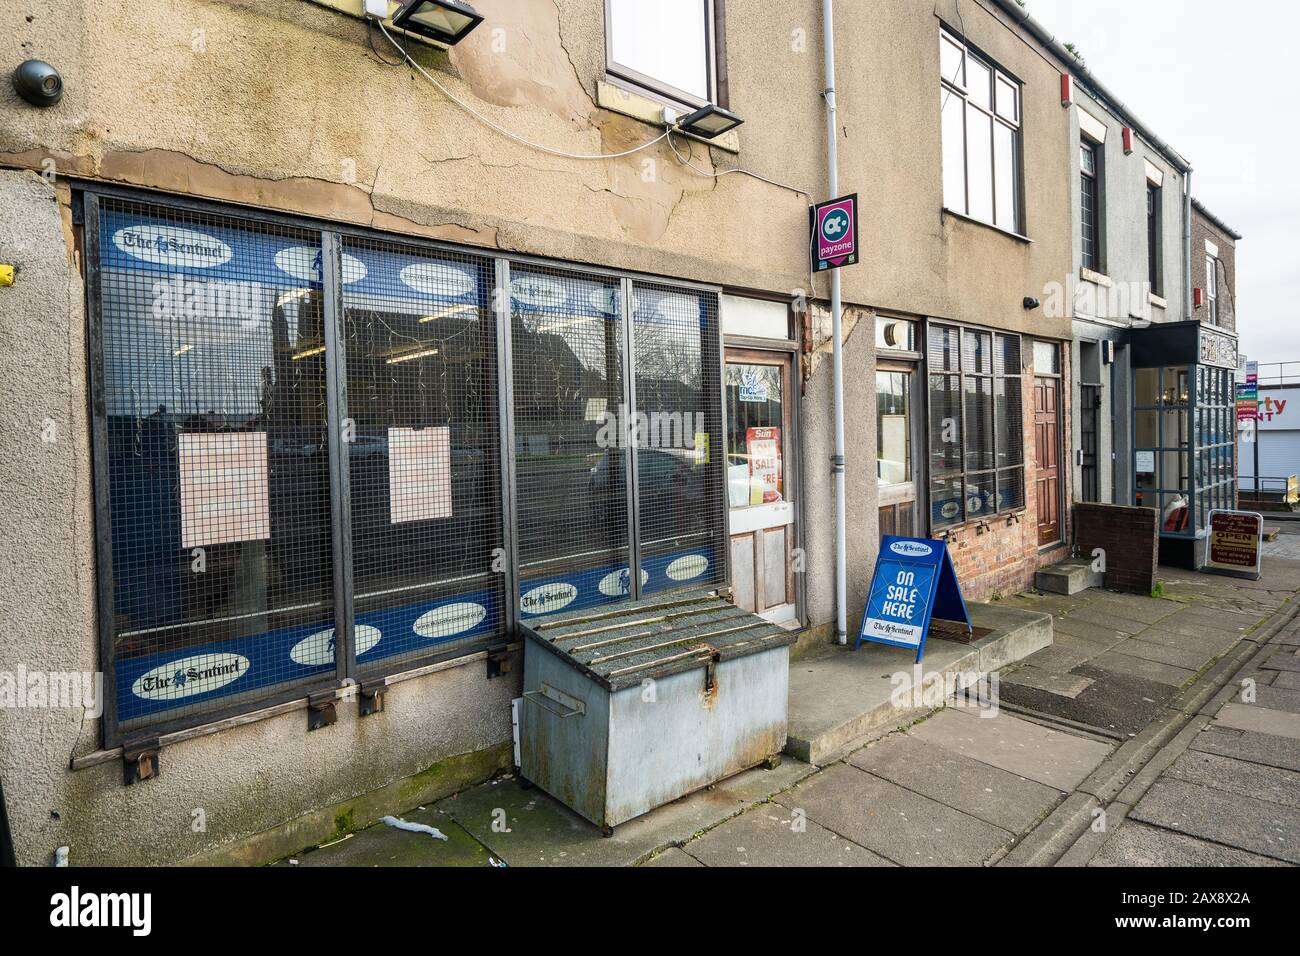 An old Public house closed down business, shops and independently run stores just outside the city centre of Hanley, Stoke on Trent, Urban decline Stock Photo